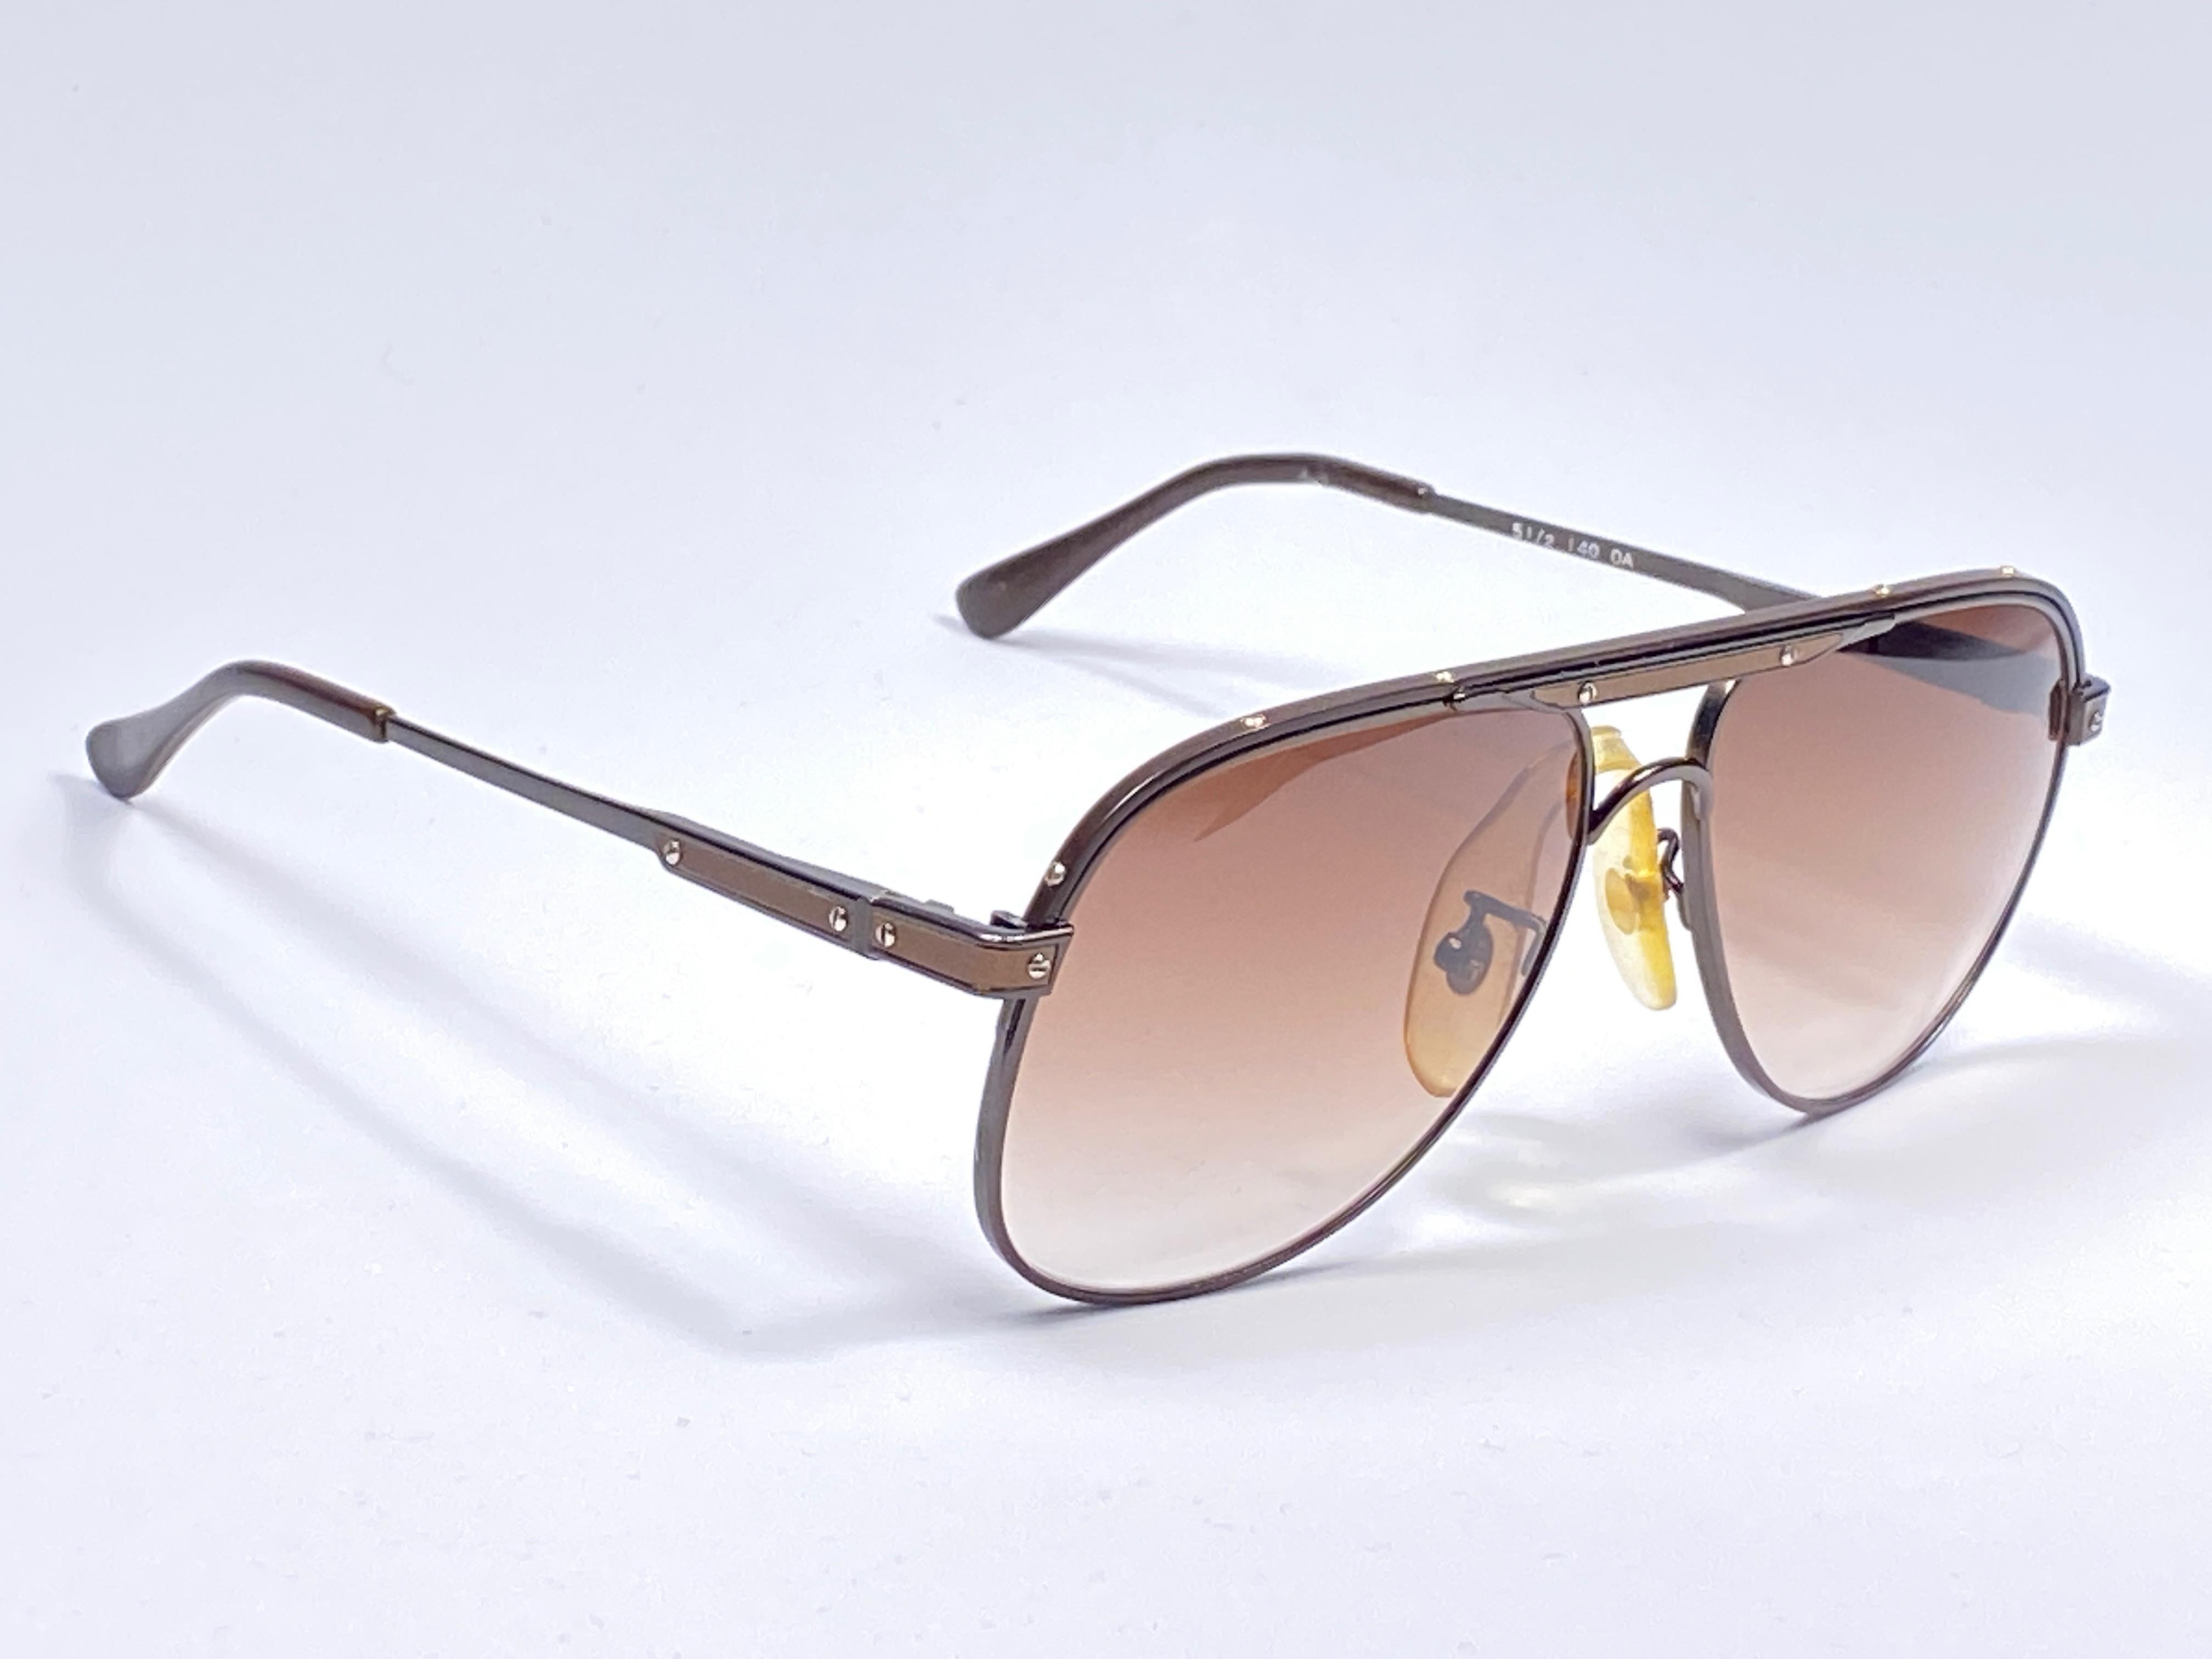 Ultra Tura oversized sunglasses circa 1970's by Tura.  

This is a seldom and rare piece not only for its aesthetic value but for its importance in the sunglasses and fashion history.   

Please notice this item its nearly 50 years old and has been